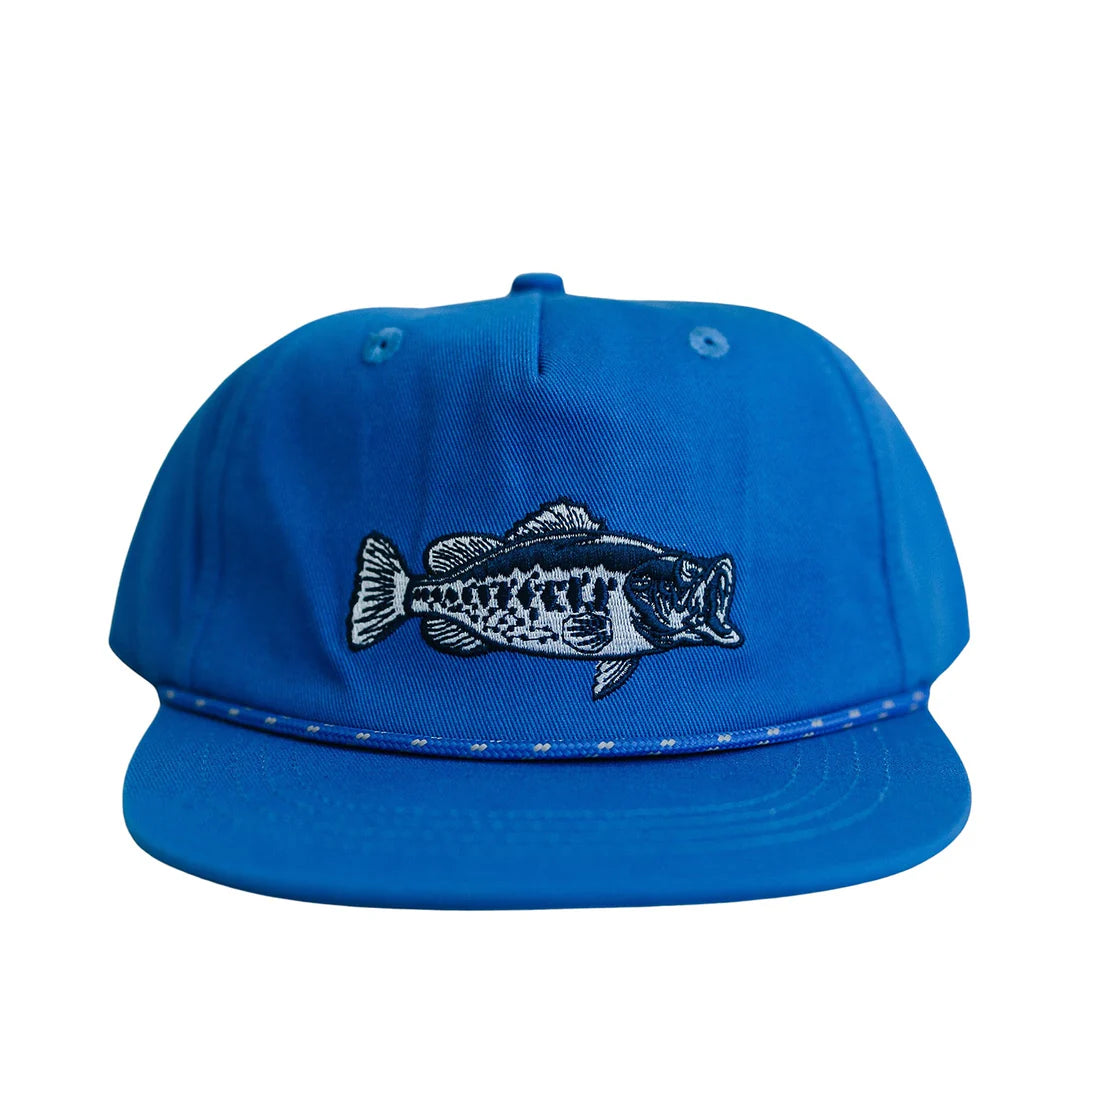 Cash and Co. Blue Bass Hat